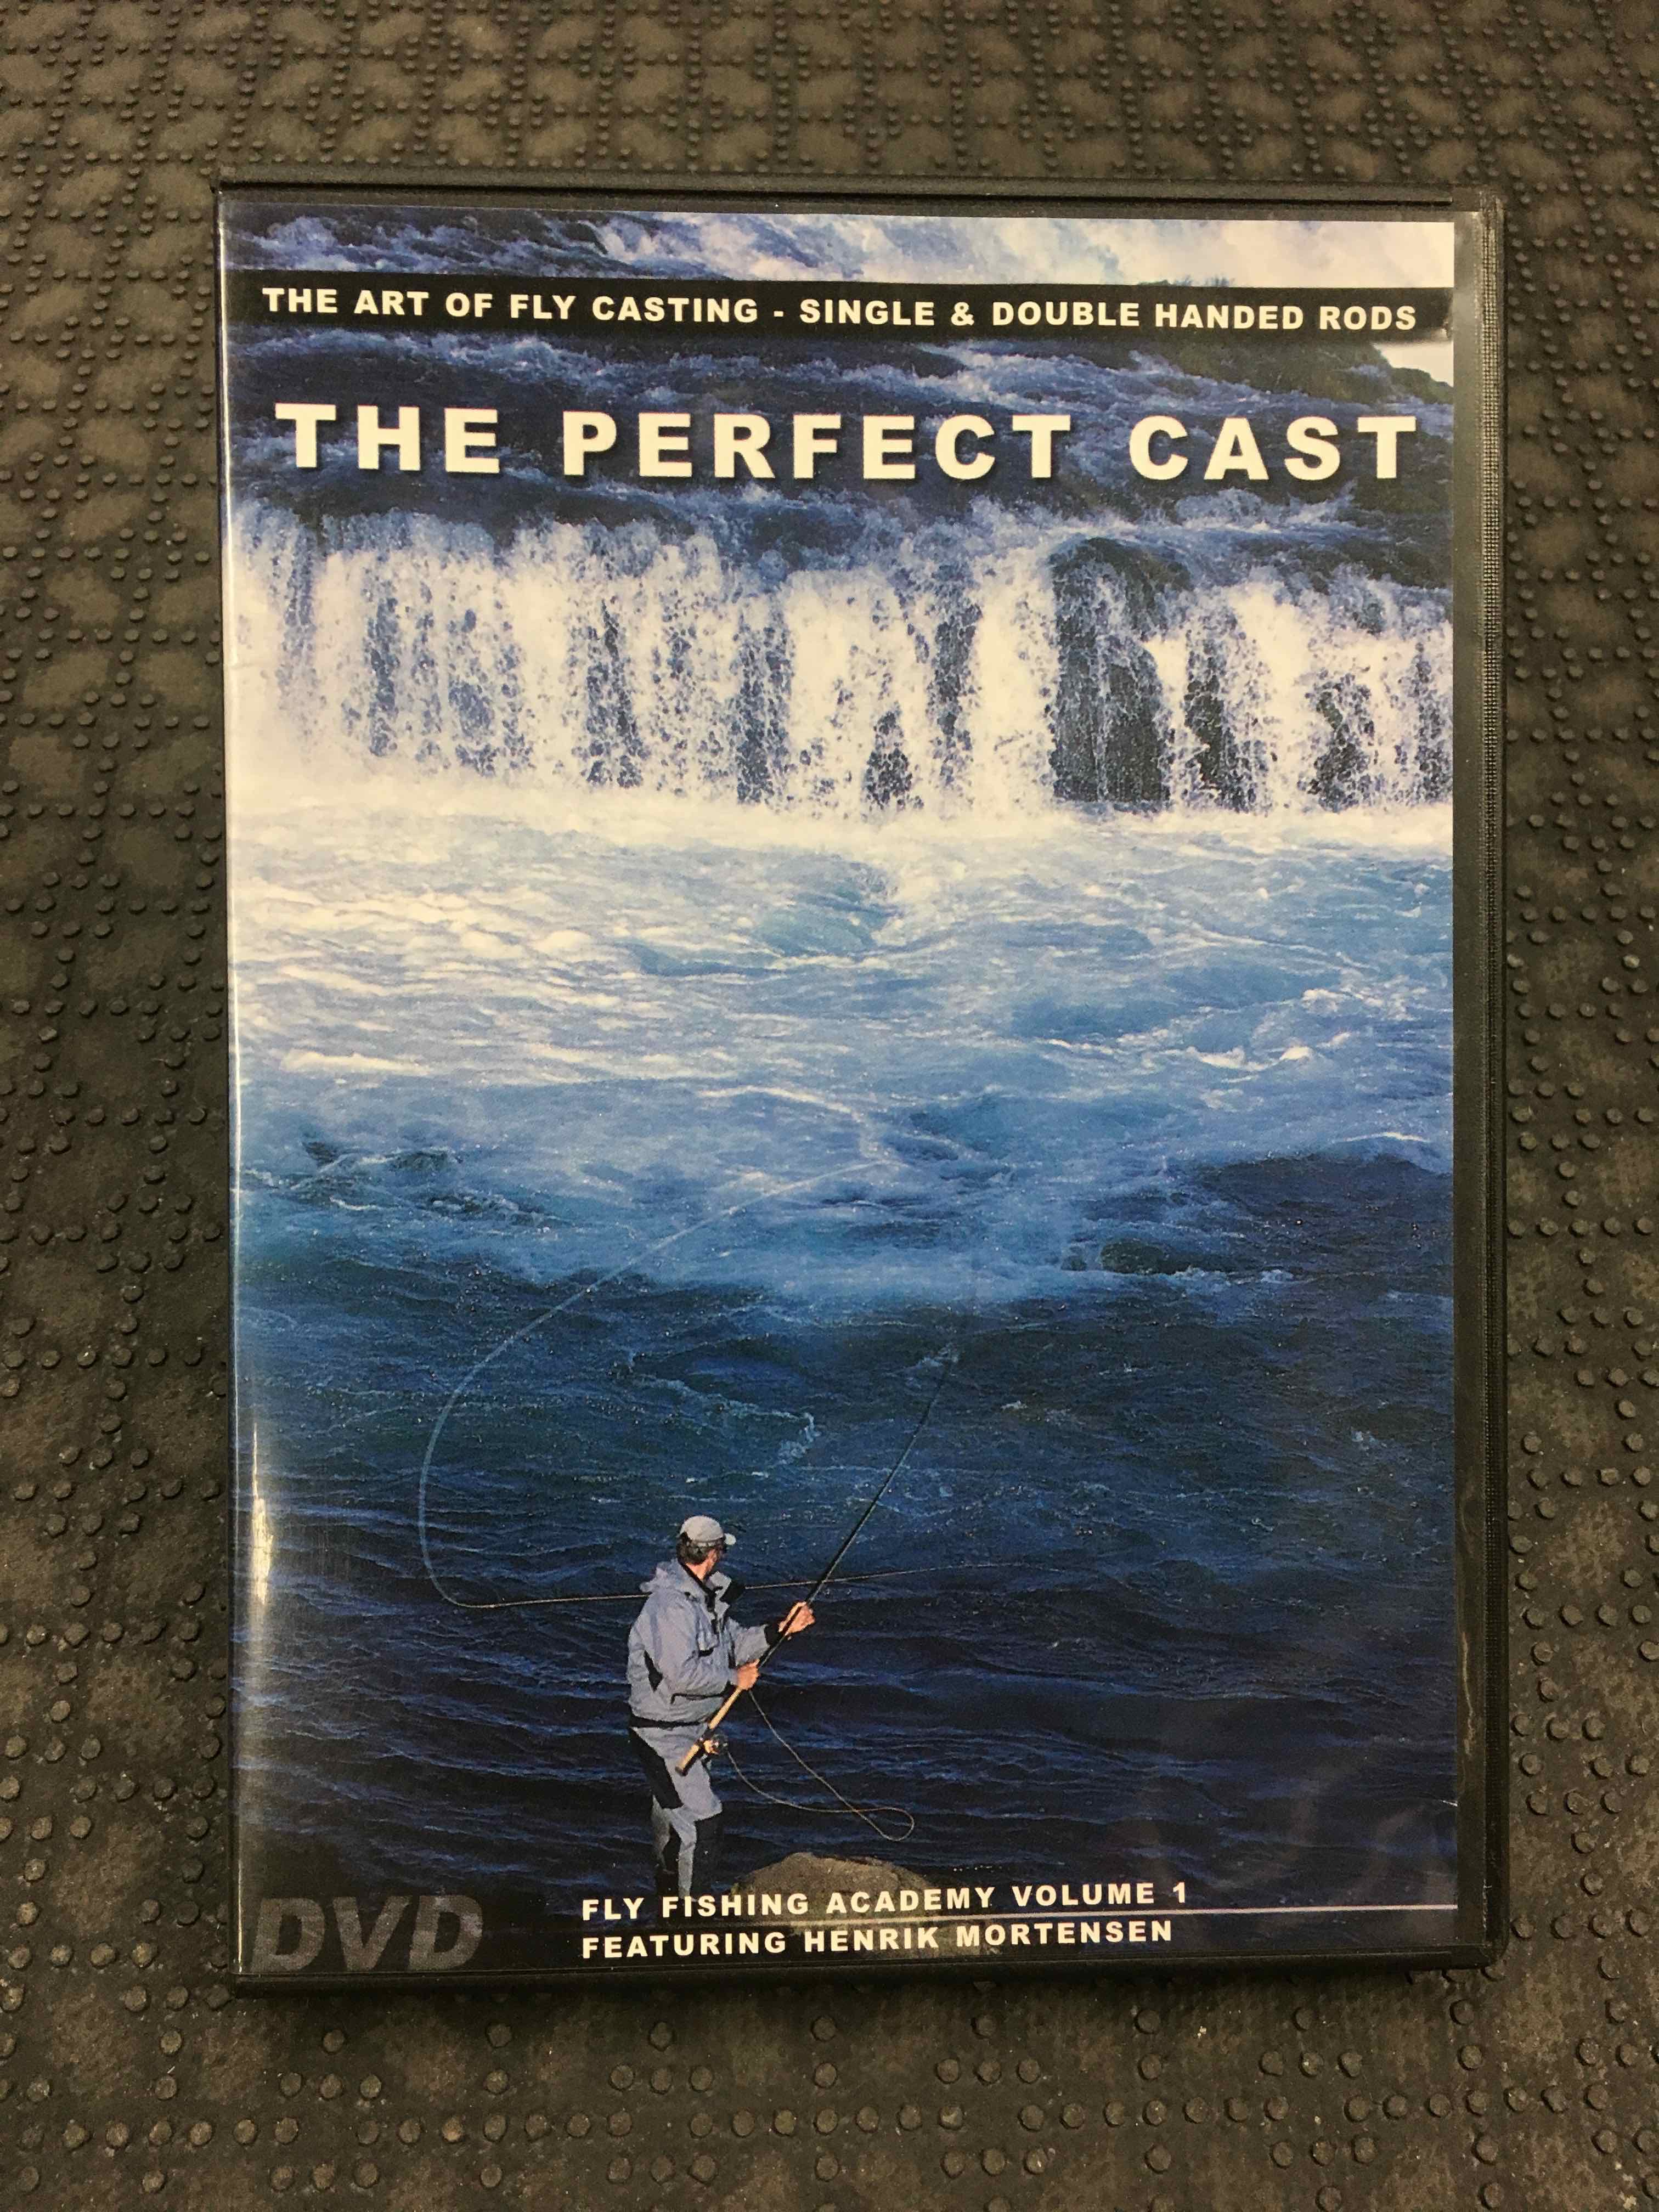 SOLD! – DVD – The Perfect Cast – The Art of Fly Casting Single